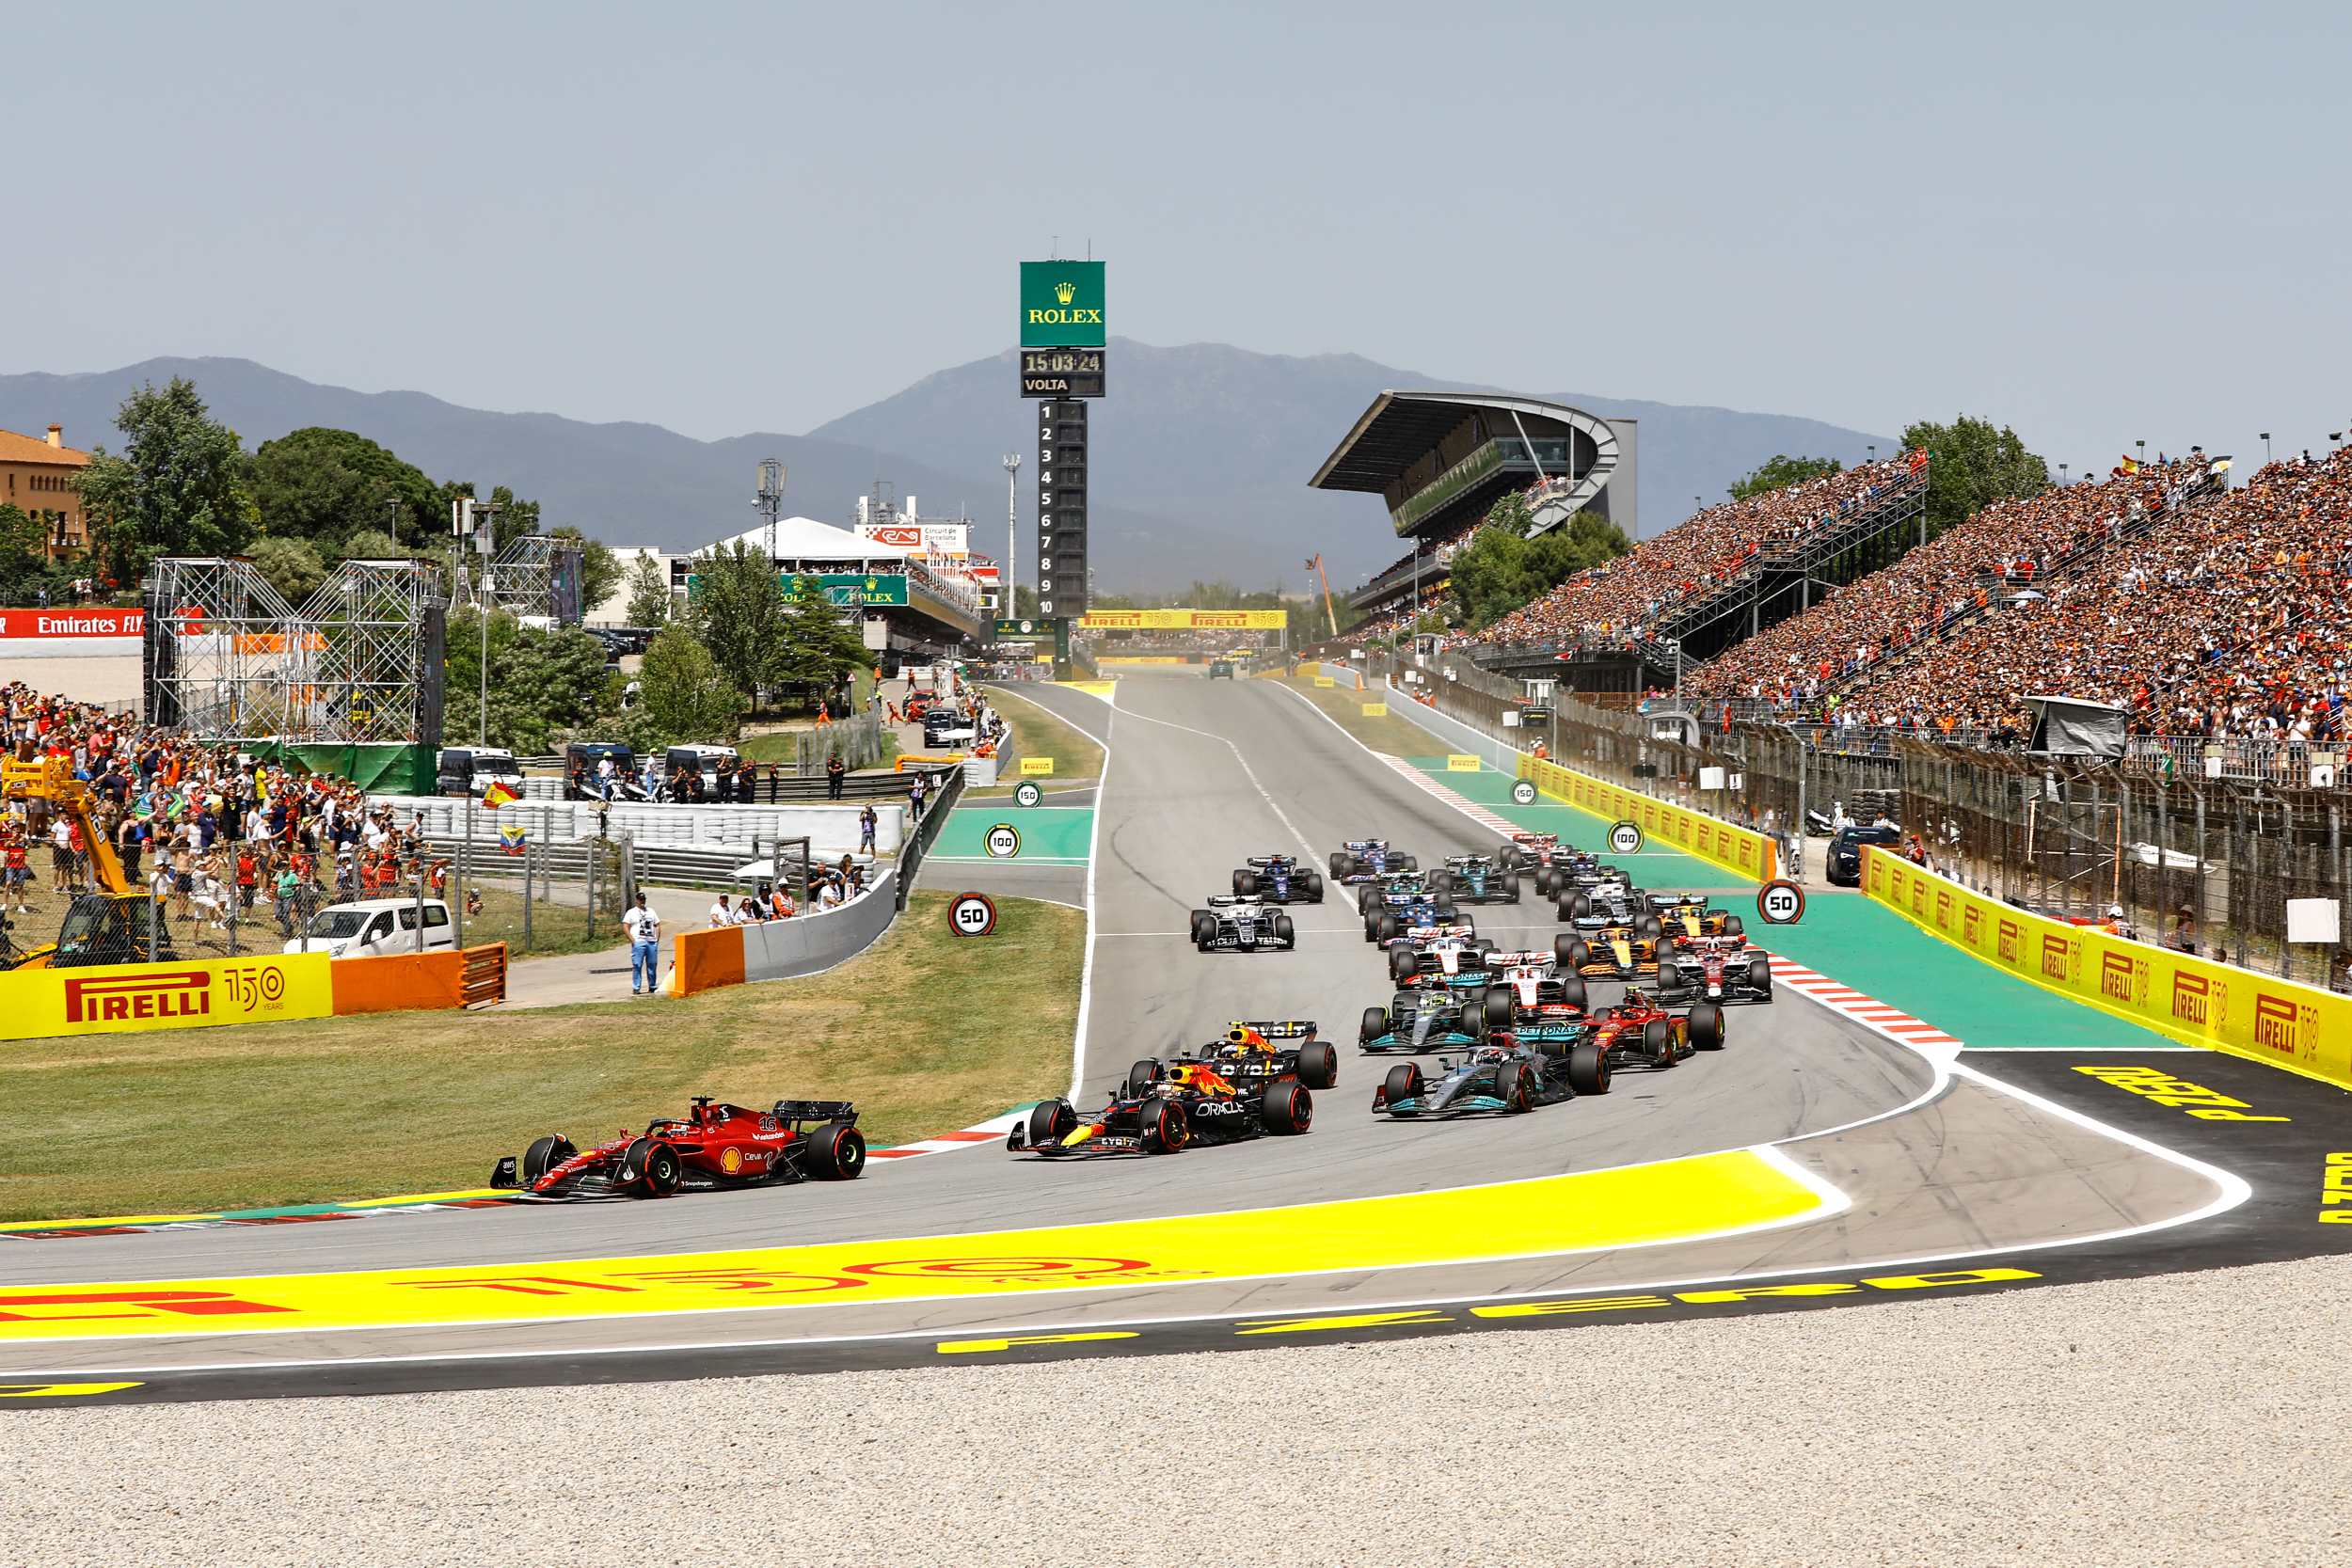 The Barcelona Formula 1 Race with SpainTop image